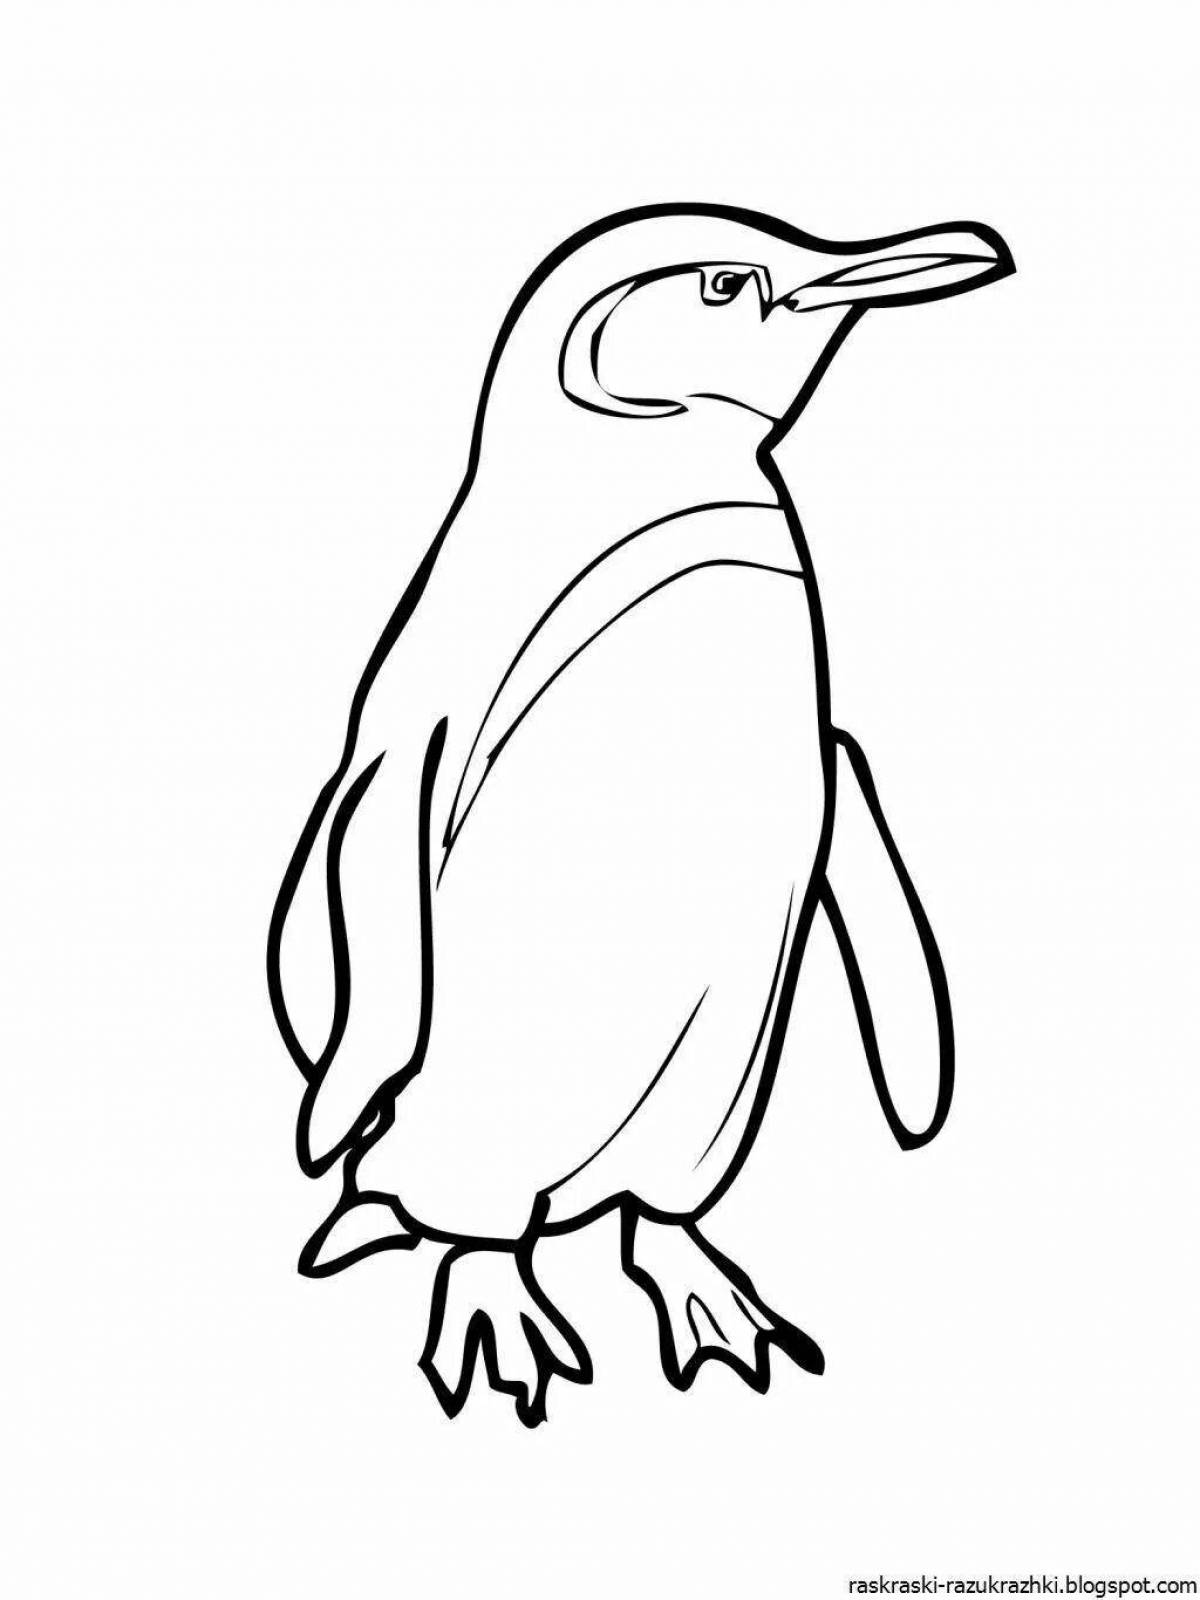 Glowing penguin coloring page